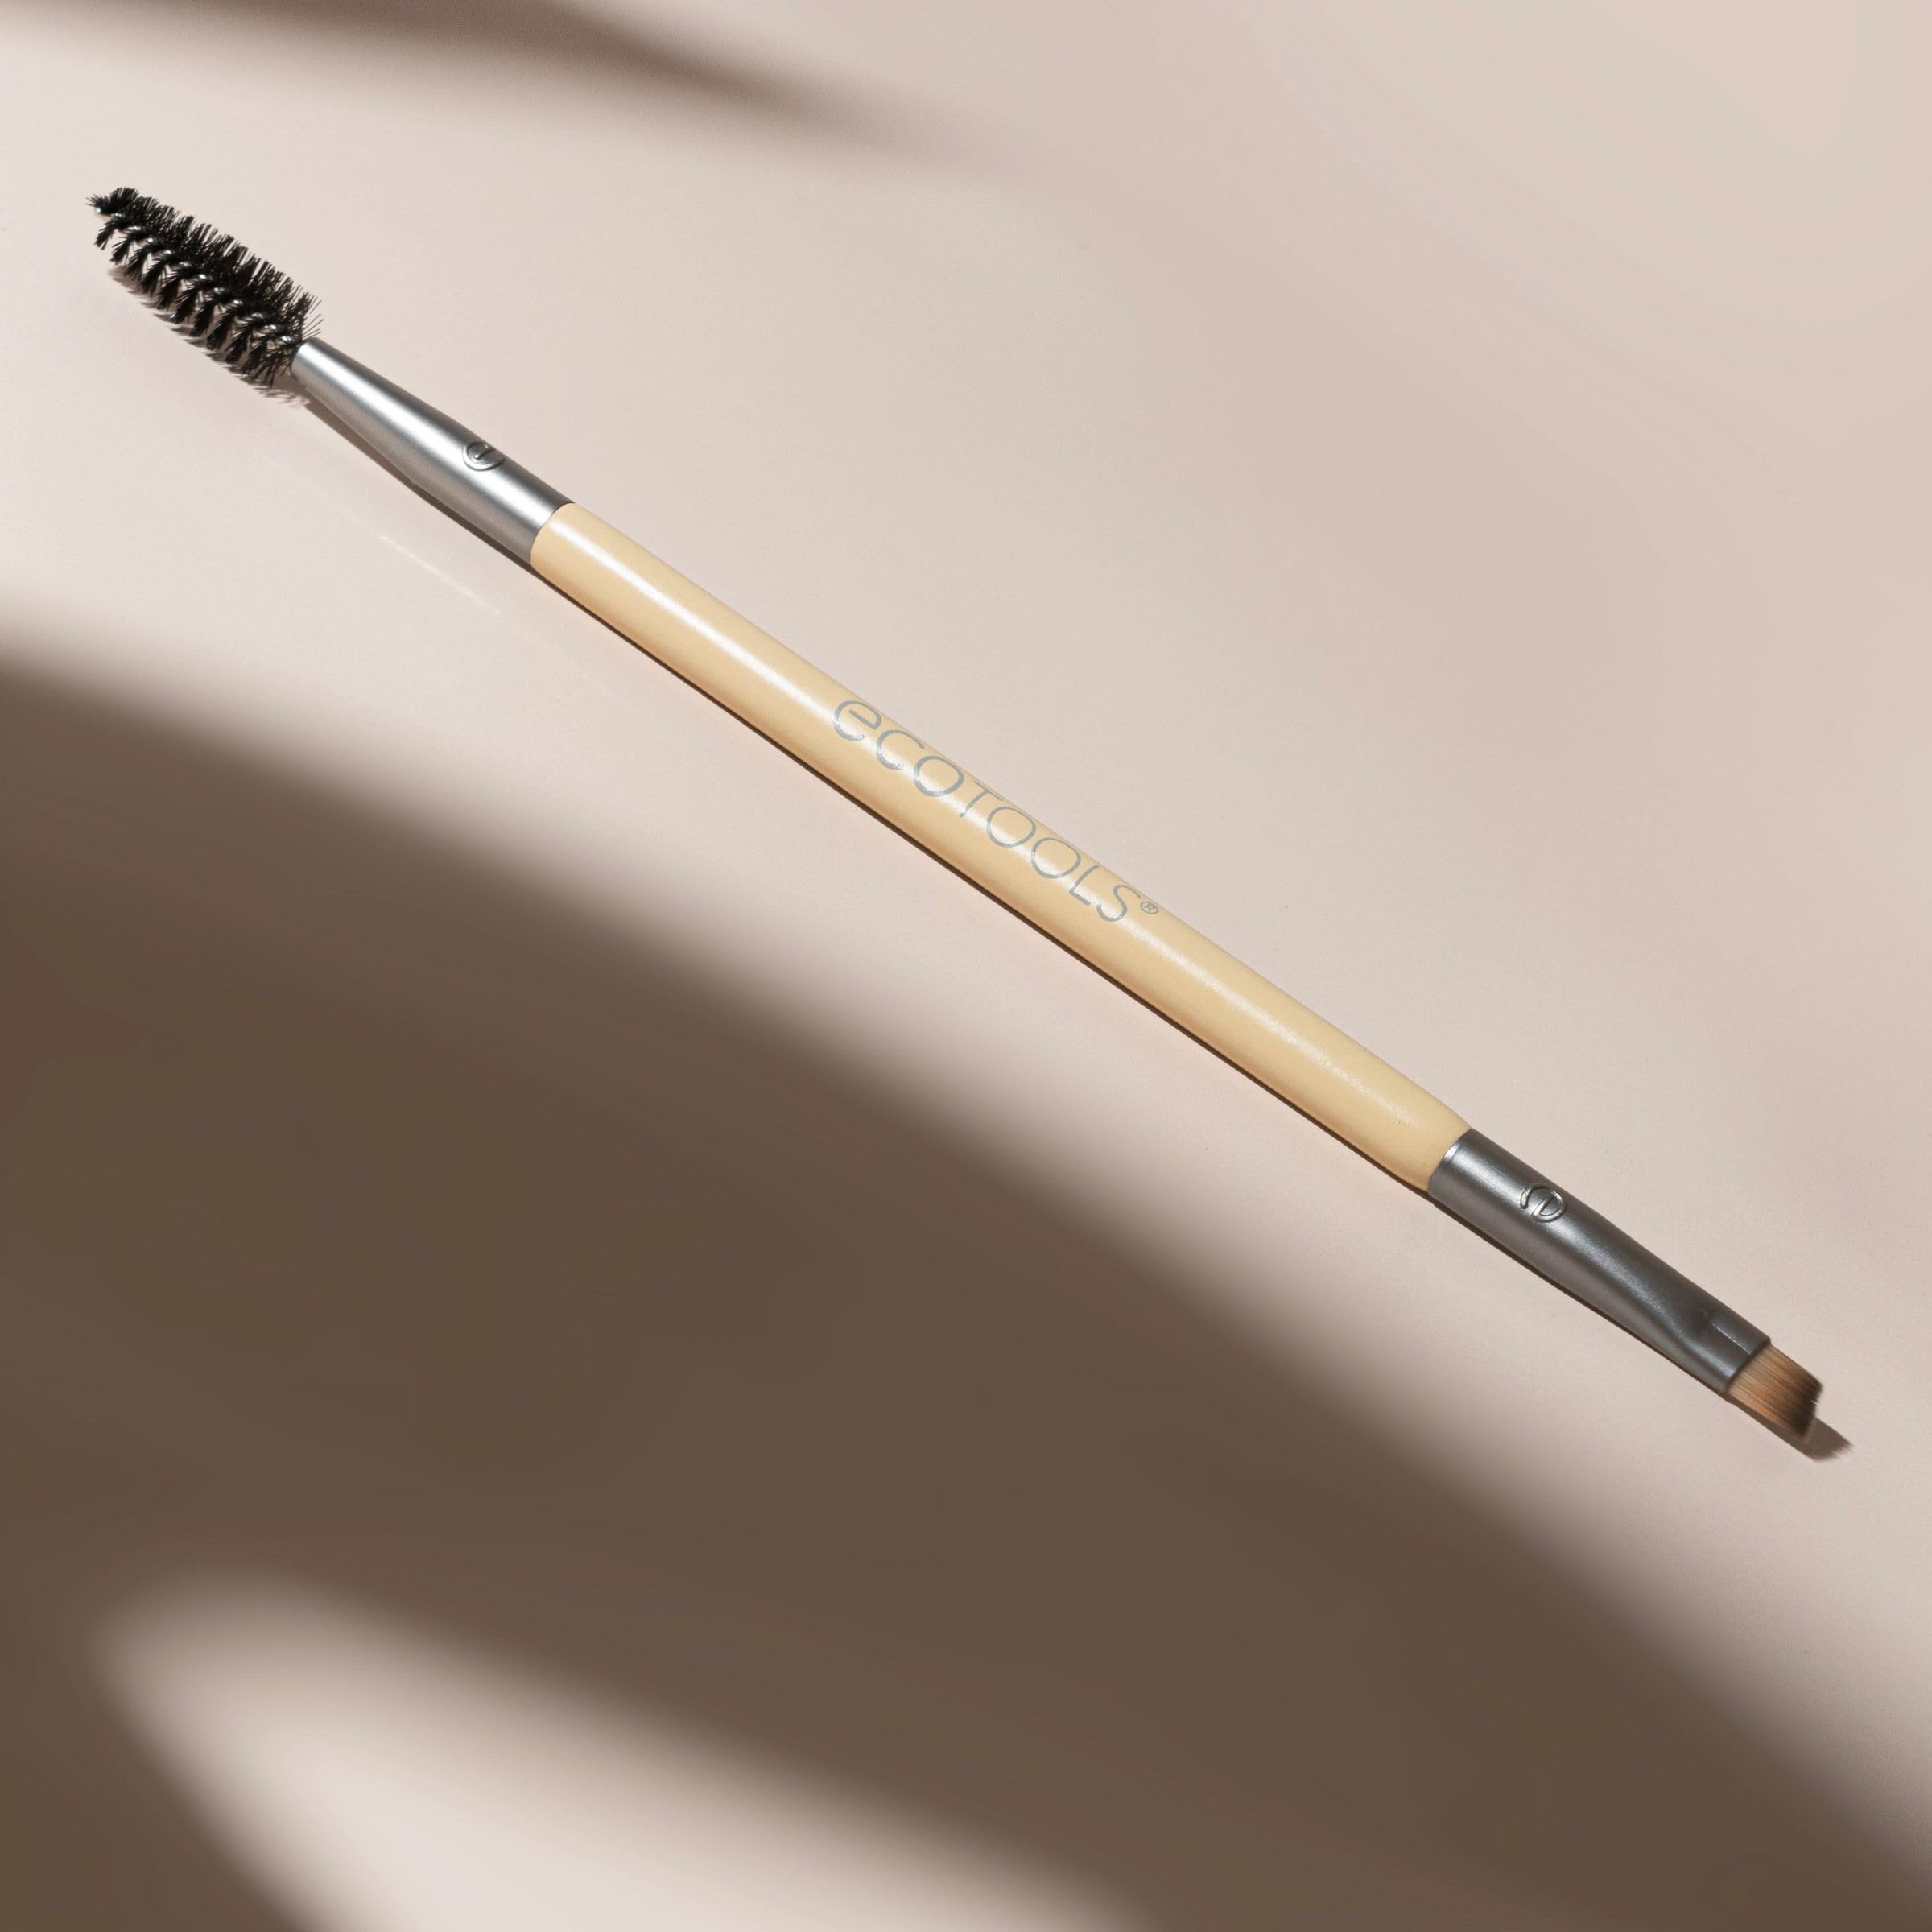 EcoTools Eyebrow Brush Duo, Tame, Sculpt & Fill in Brows, Multipurpose For Eyebrow Gel, Powder, & Cream, Dual-Ended Spoolie & Angled Brow Brush, Eco Friendly, Cruelty-Free, & Vegan, 1 Count